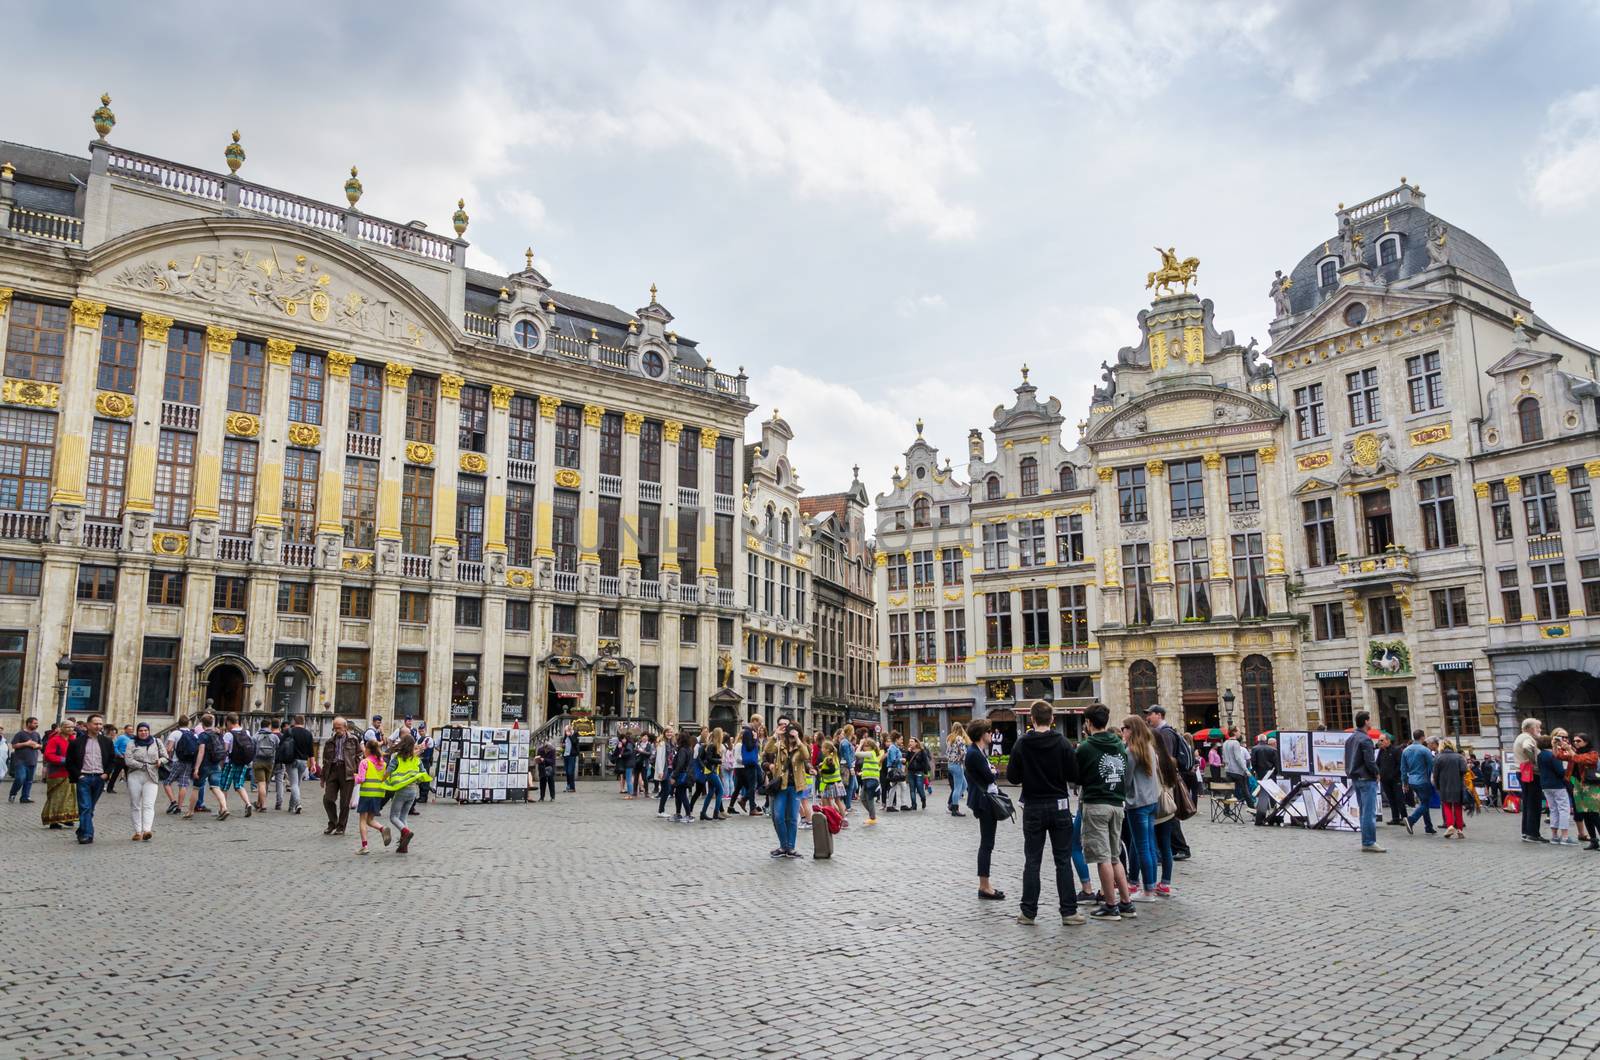 Brussels, Belgium - May 13, 2015: Many tourists visiting famous Grand Place (Grote Markt) the central square of Brussels. The square is the most important tourist destination and most memorable landmark in Brussels.